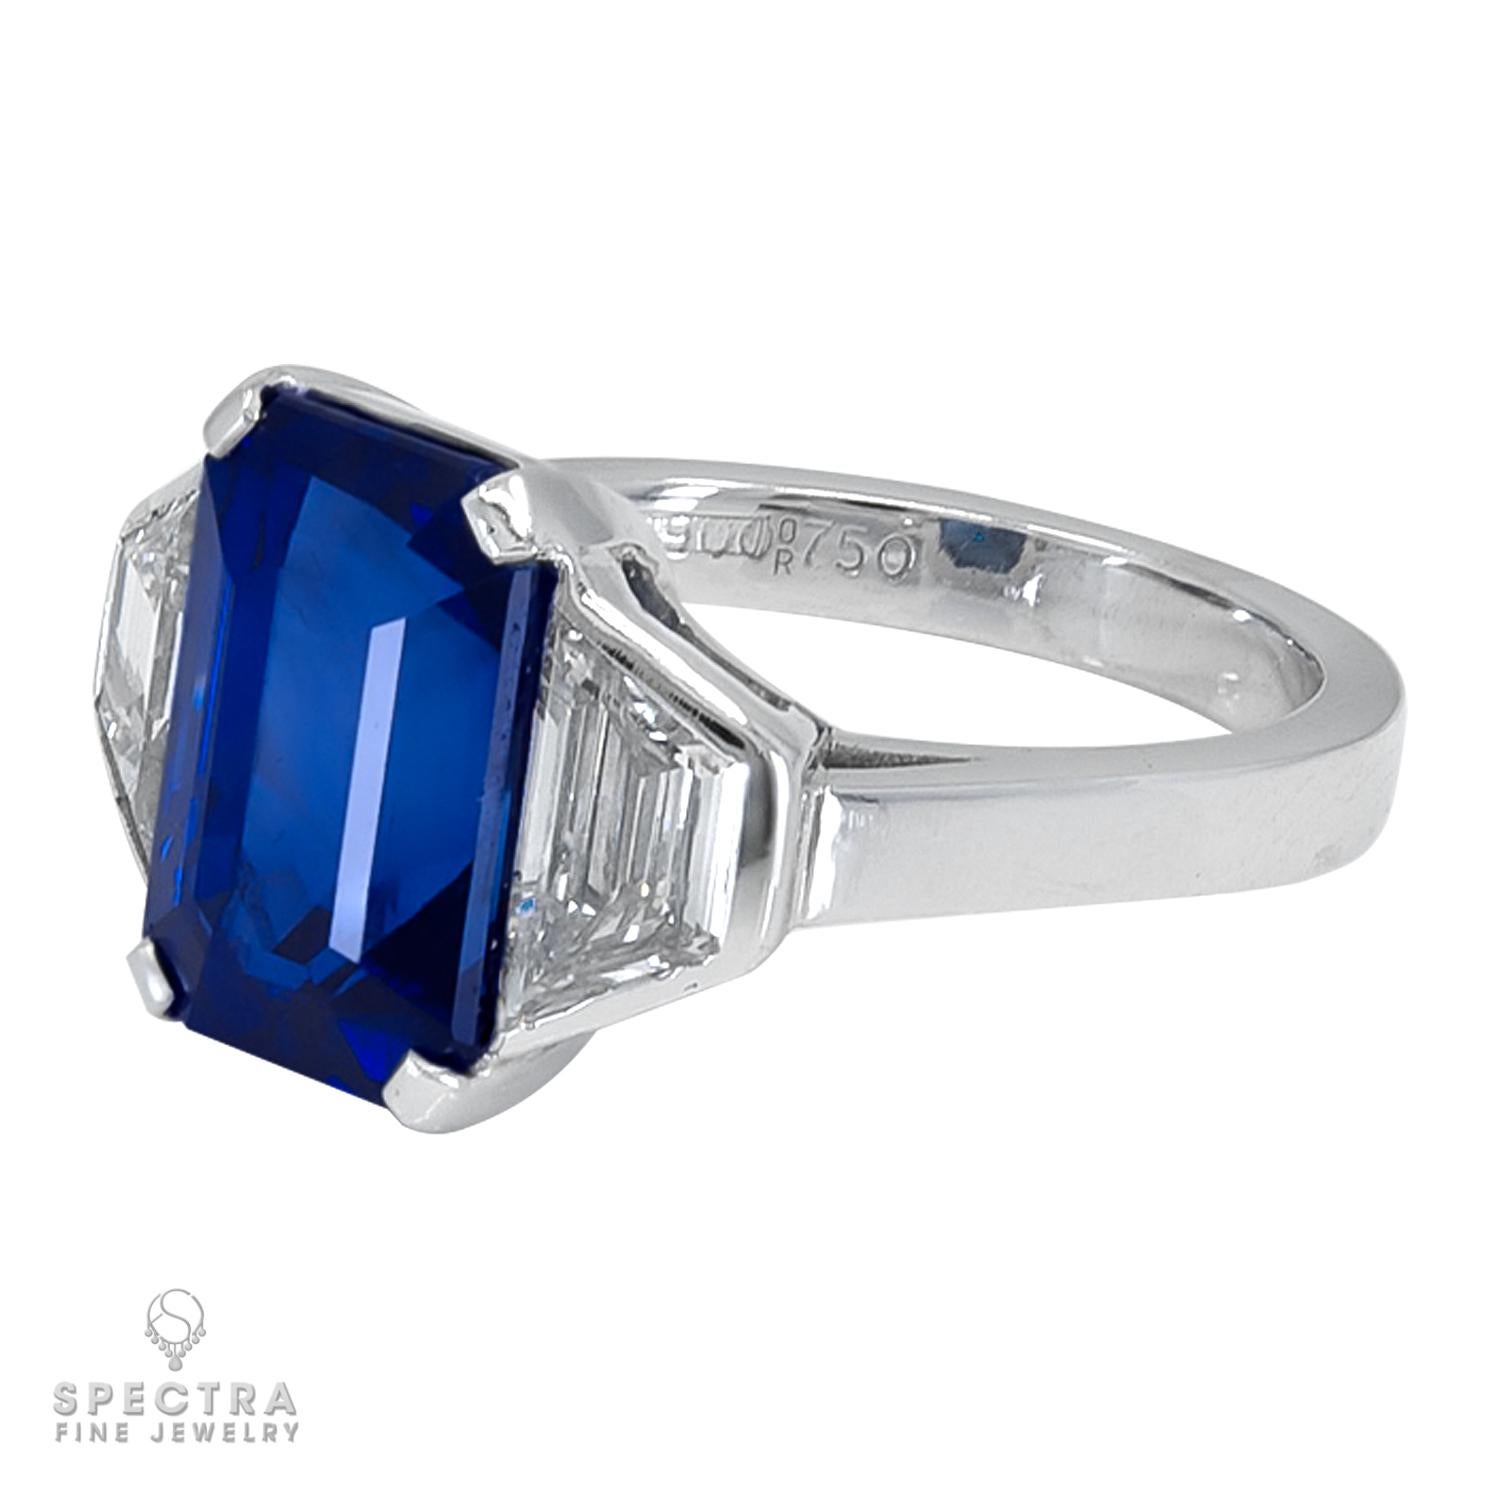 This exquisite Bulgari cocktail ring is a true masterpiece of luxury jewelry, featuring a stunning 6.40-carat royal-blue emerald-cut sapphire flawlessly set in 18K white gold. The sapphire is a natural and rare treasure certified by GRS to have no